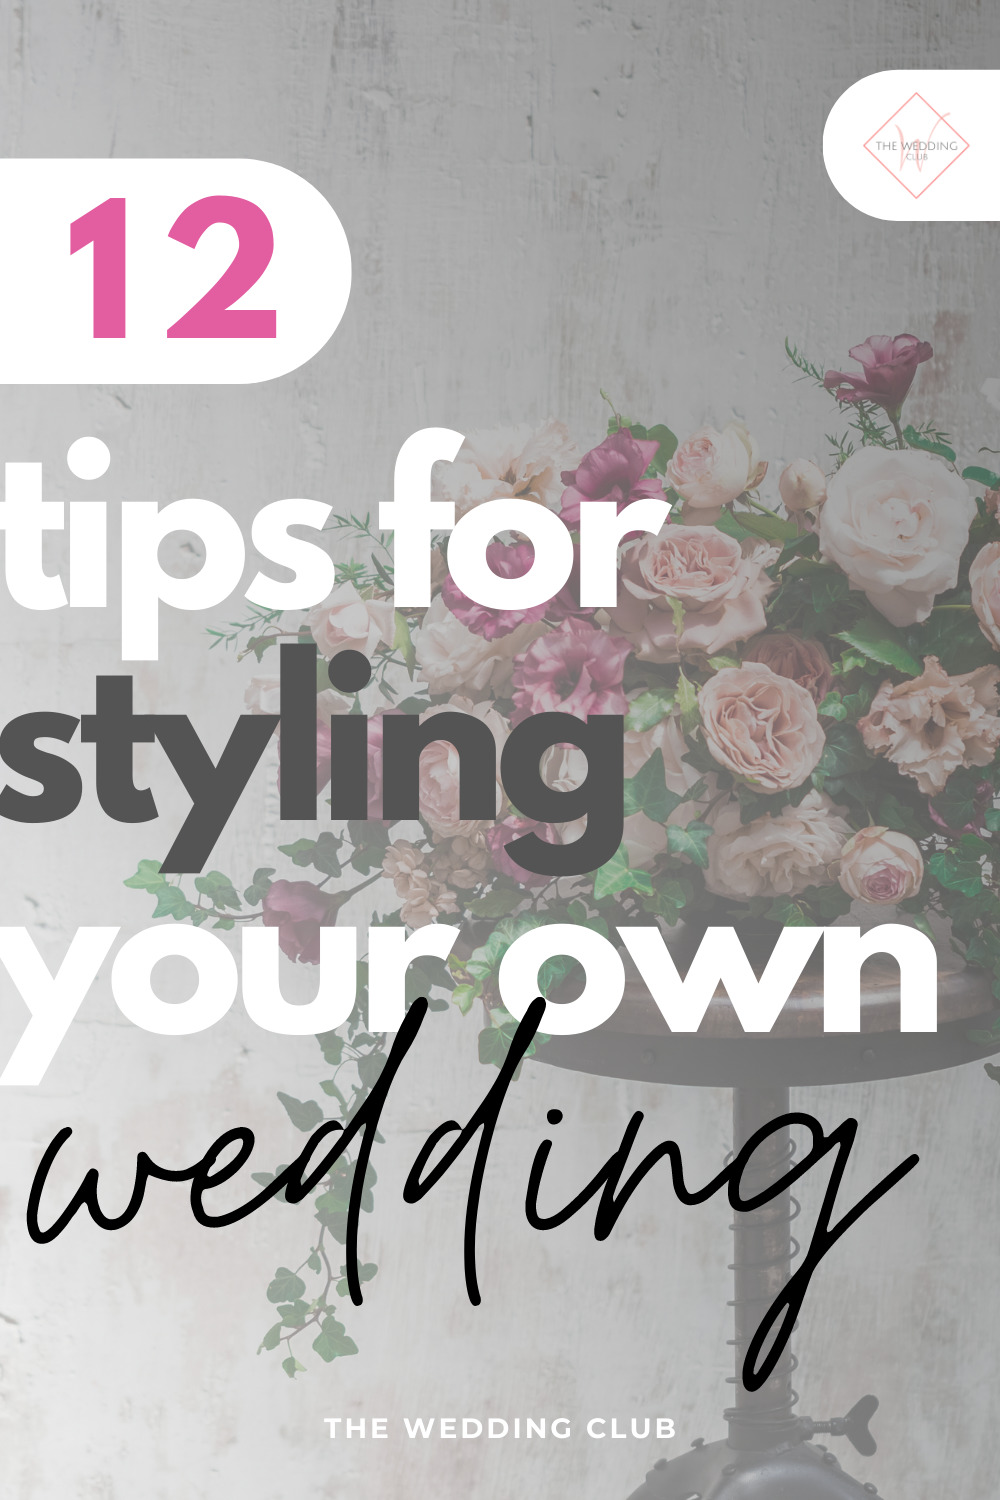 12 Tips for styling your own wedding